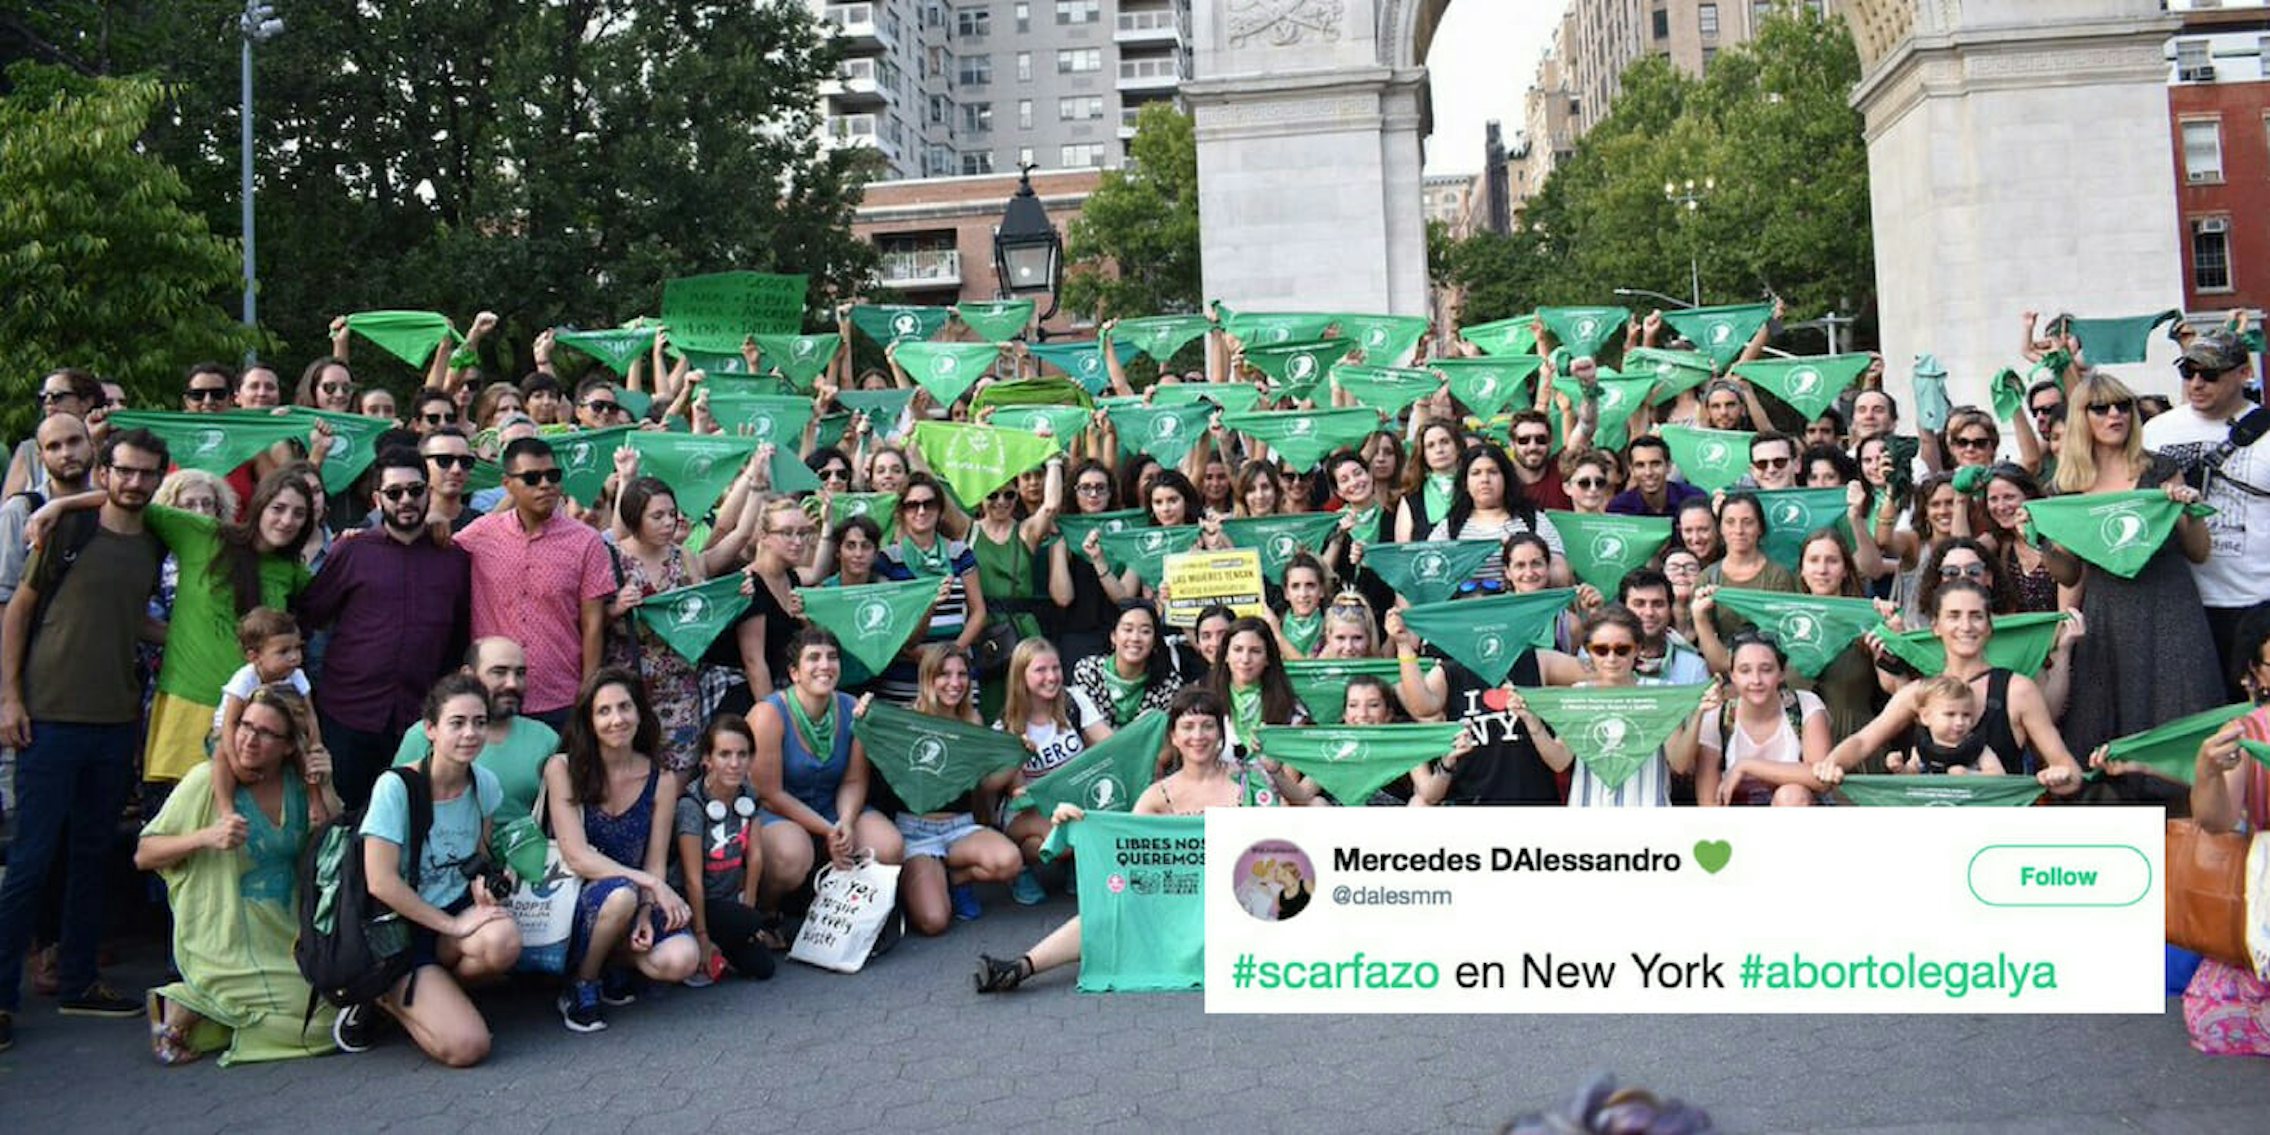 Protesters holding up green bandanas to support abortion in Argentina.